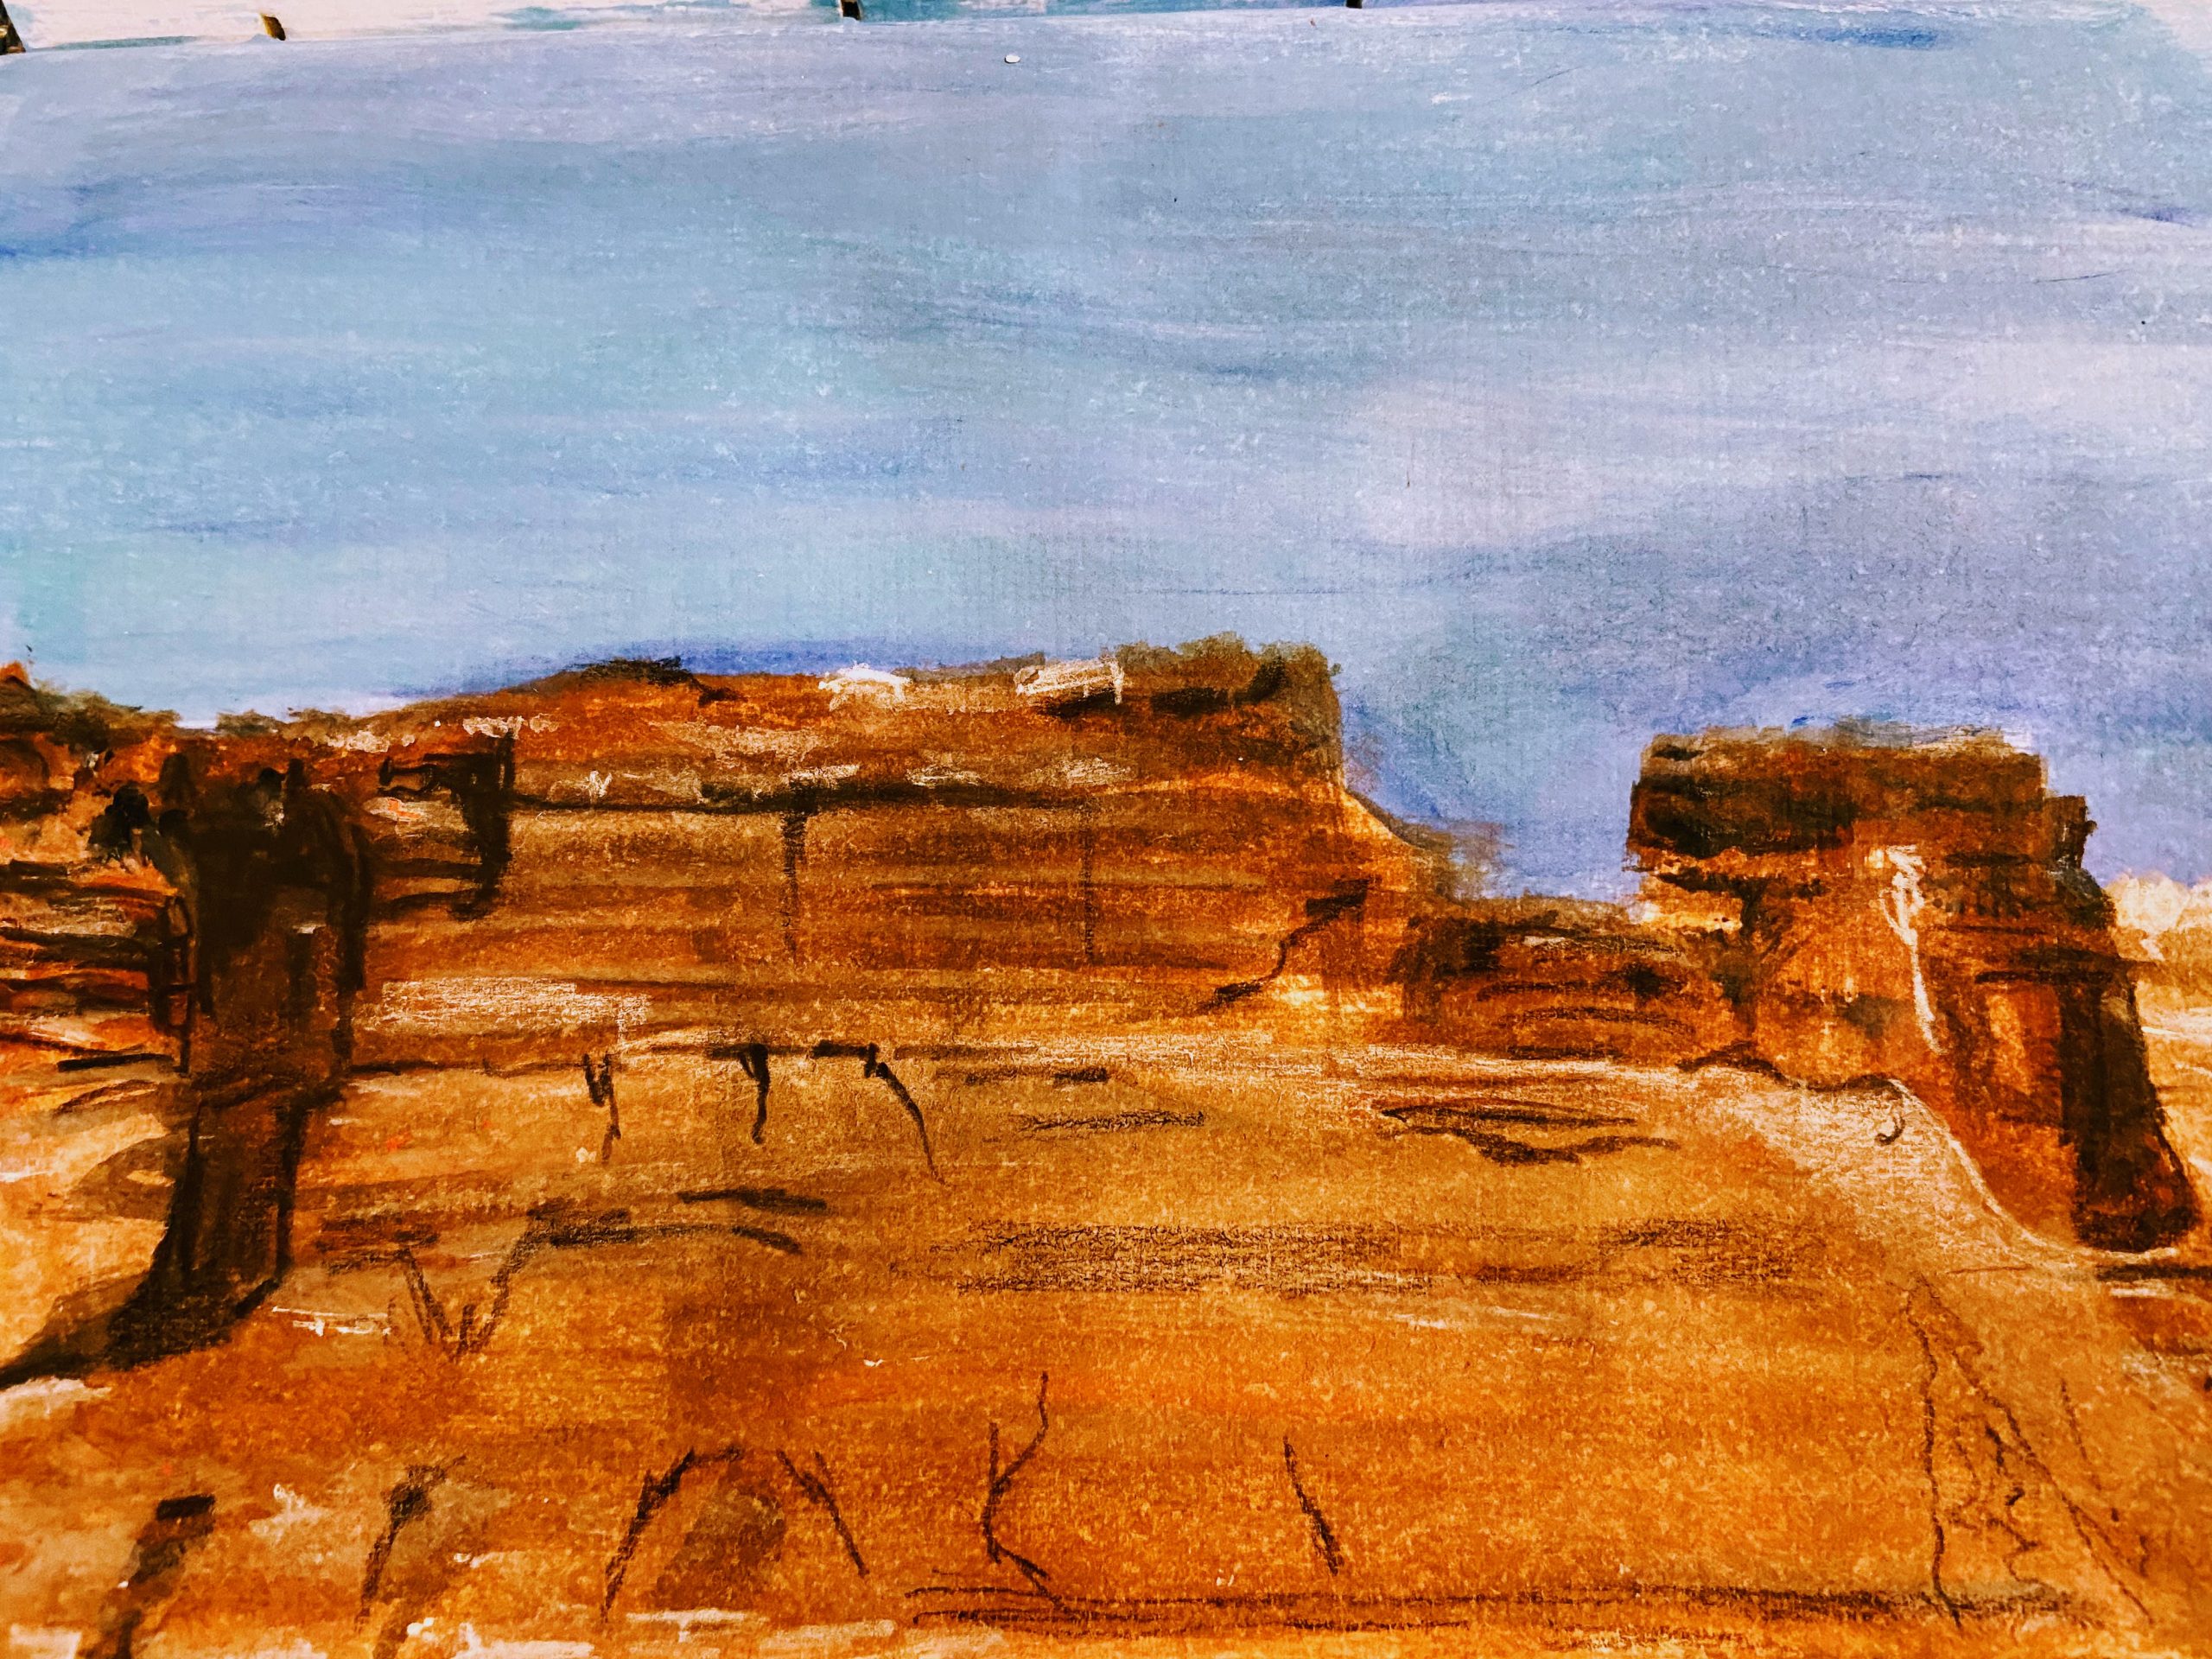 Cliffs near Marblwe Canyon painted with acrylics